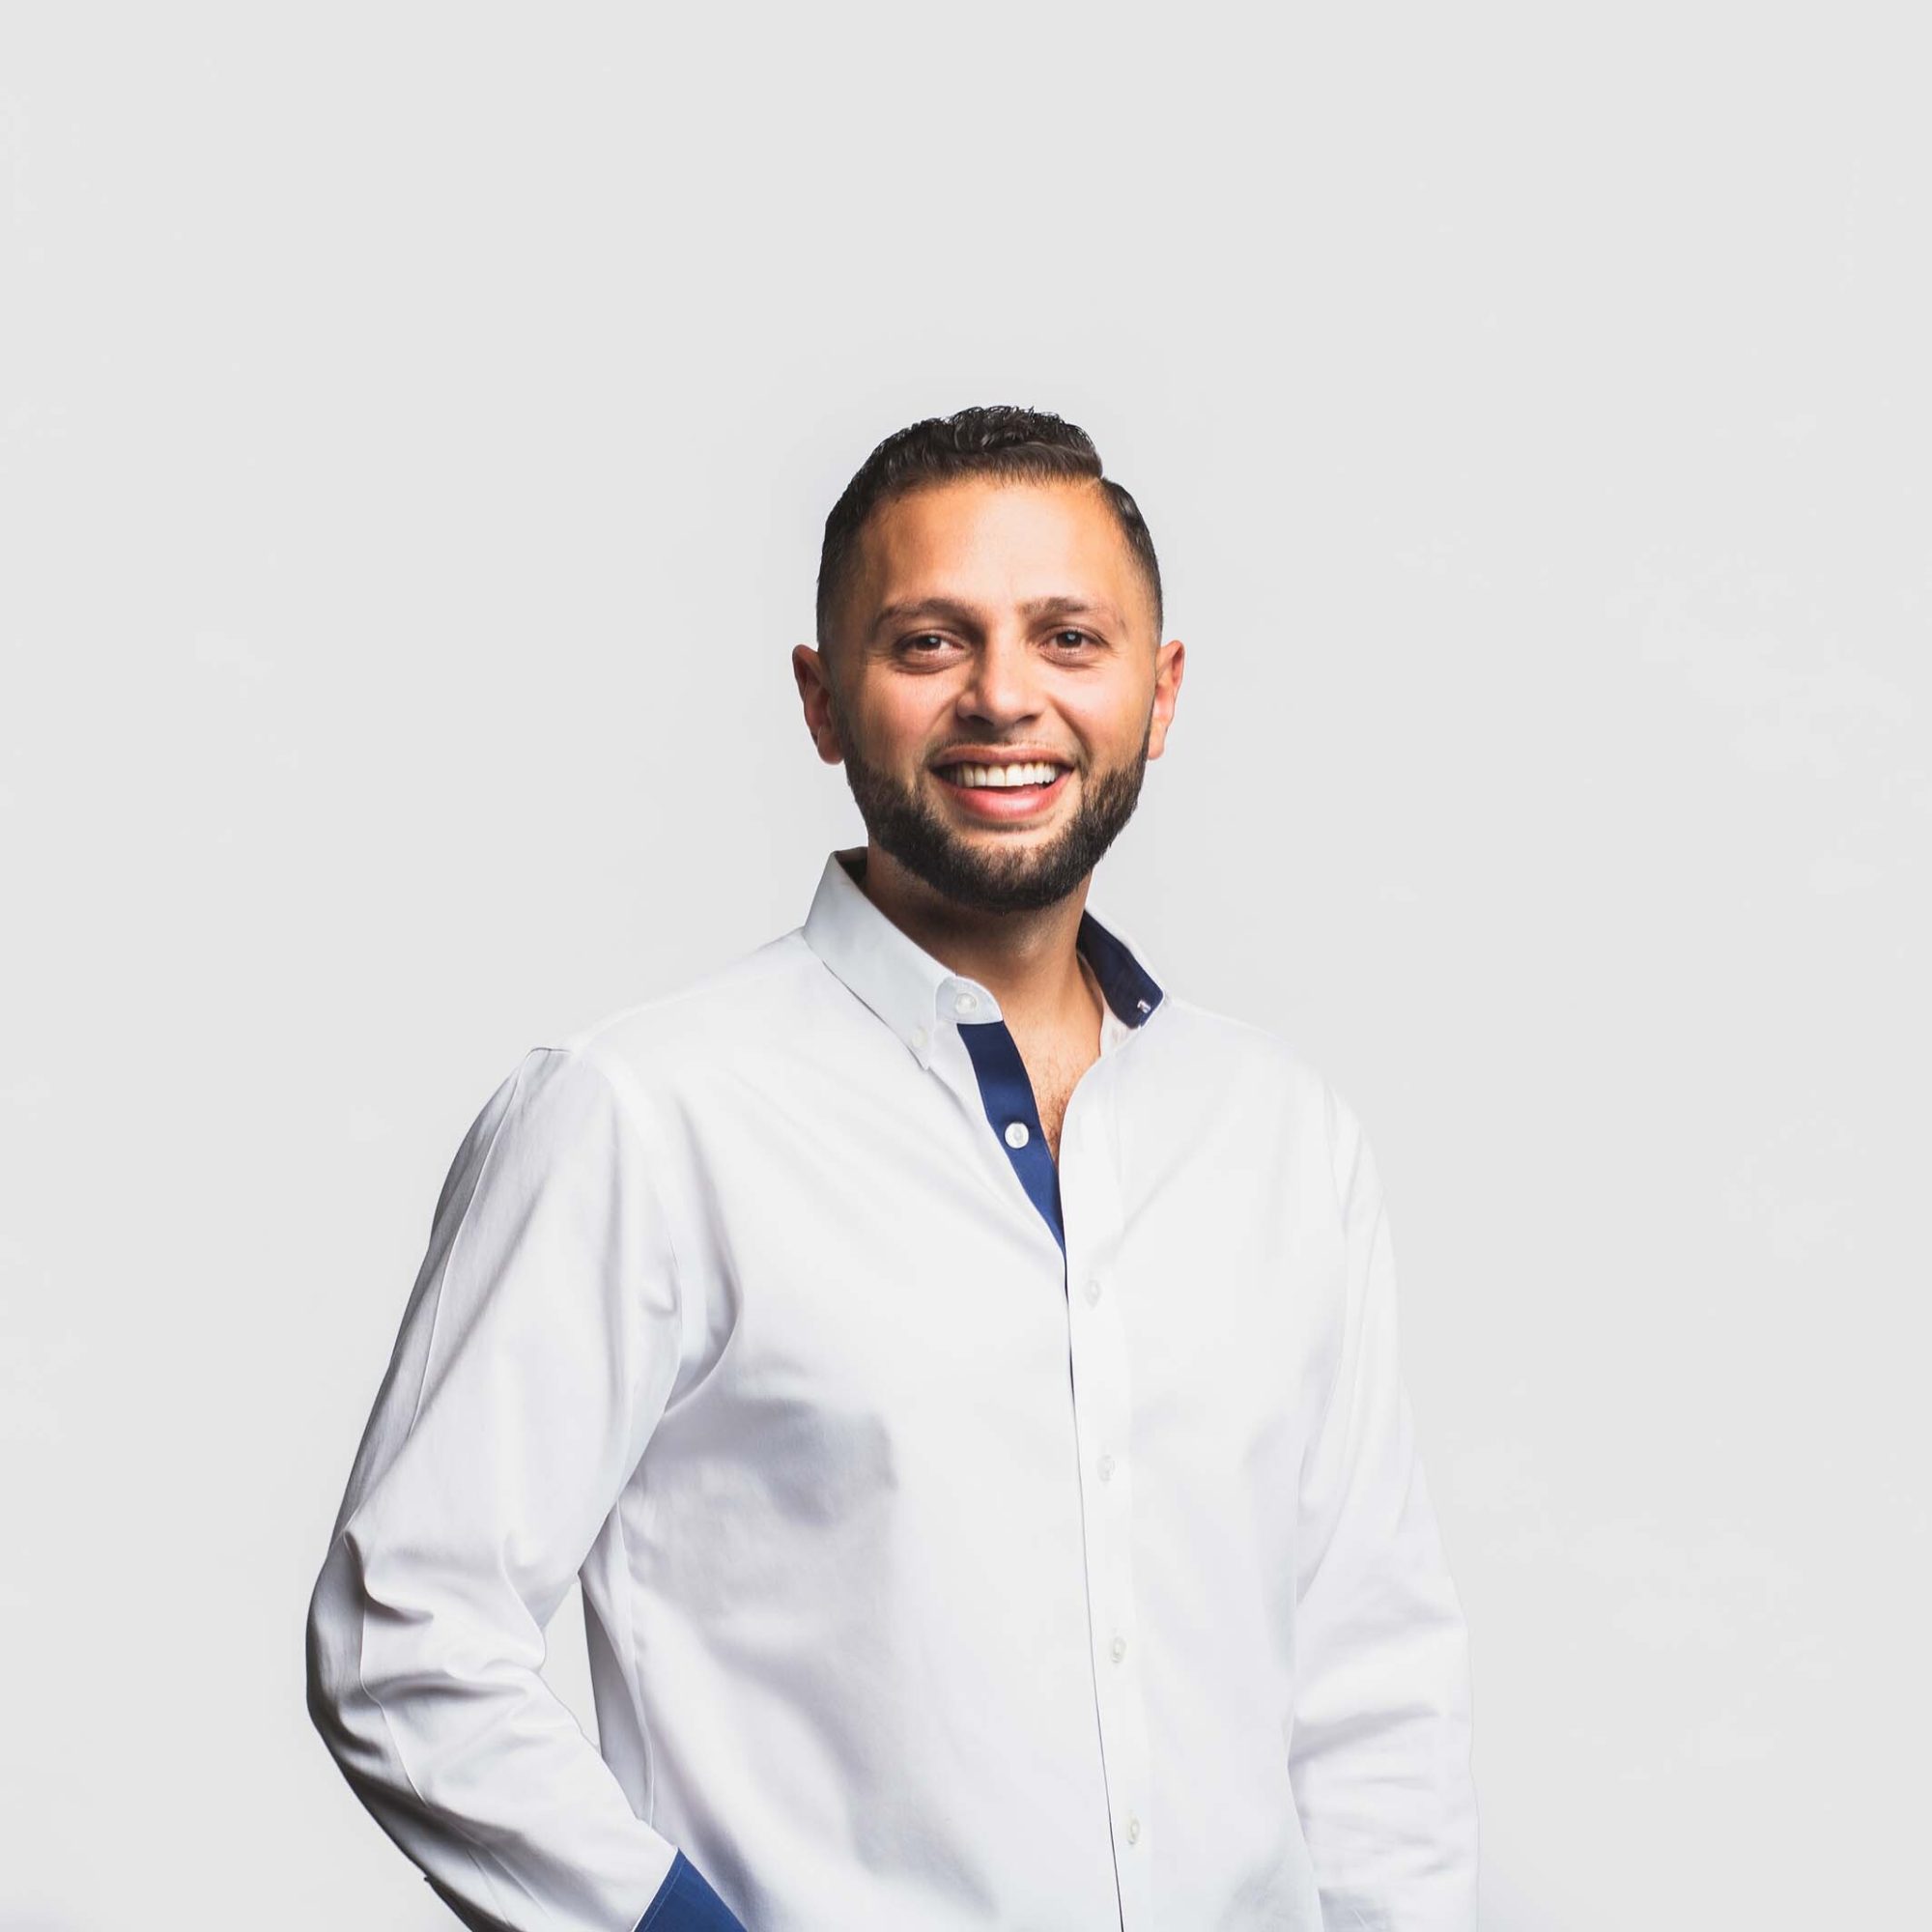 Abdullah Snobar standing in a white shirt and smiling into the camera against a white background.